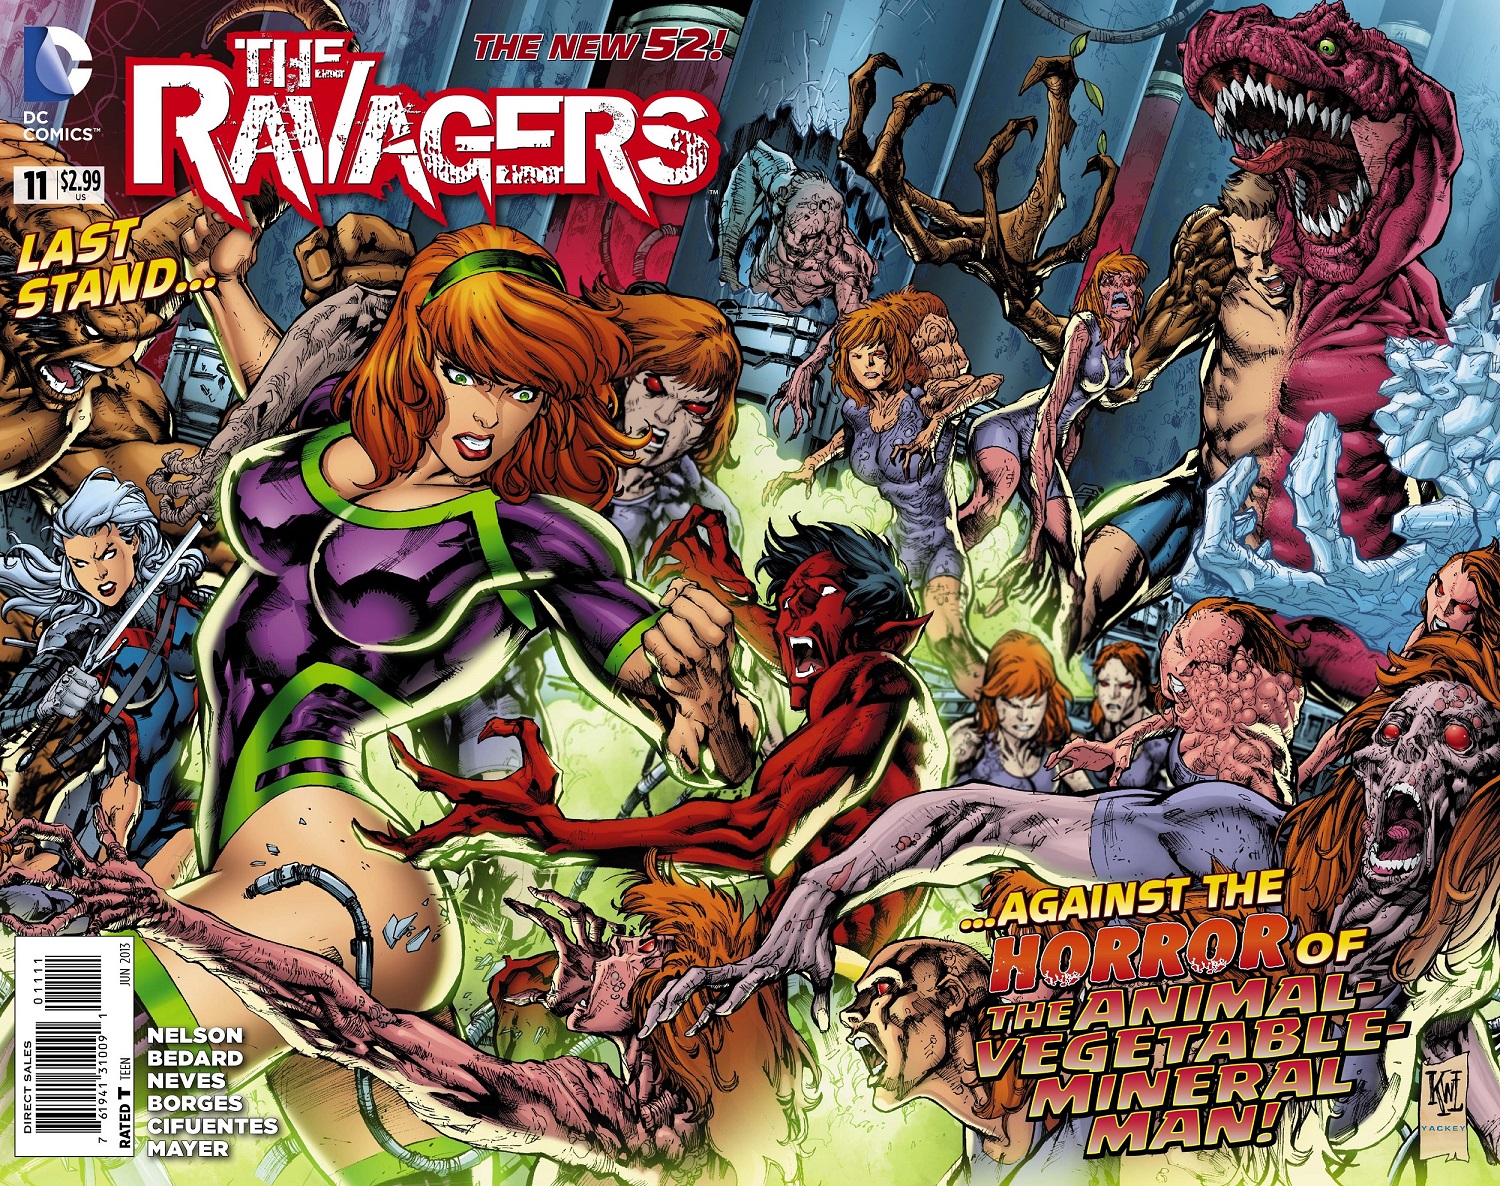 THE RAVAGERS #11